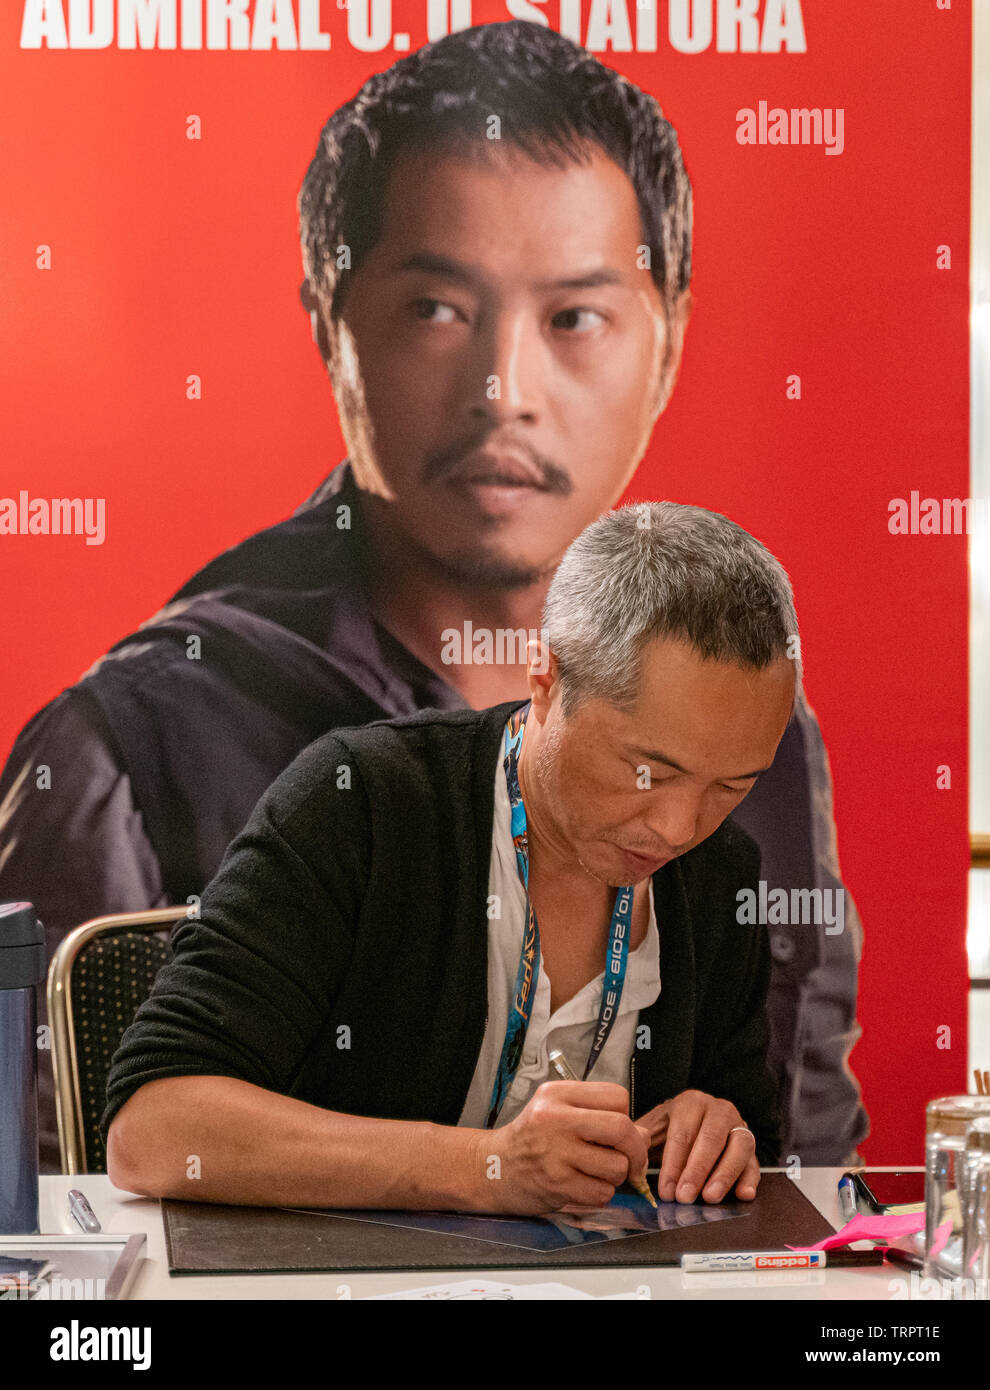 Bonn, Germany - June 8 2019: Ken Leung (*1970, American actor - Star Wars, LOST) signing autographs for fans at FedCon 28, a four day sci-fi convention. FedCon 28 took place Jun 7-10 2019. Stock Photo